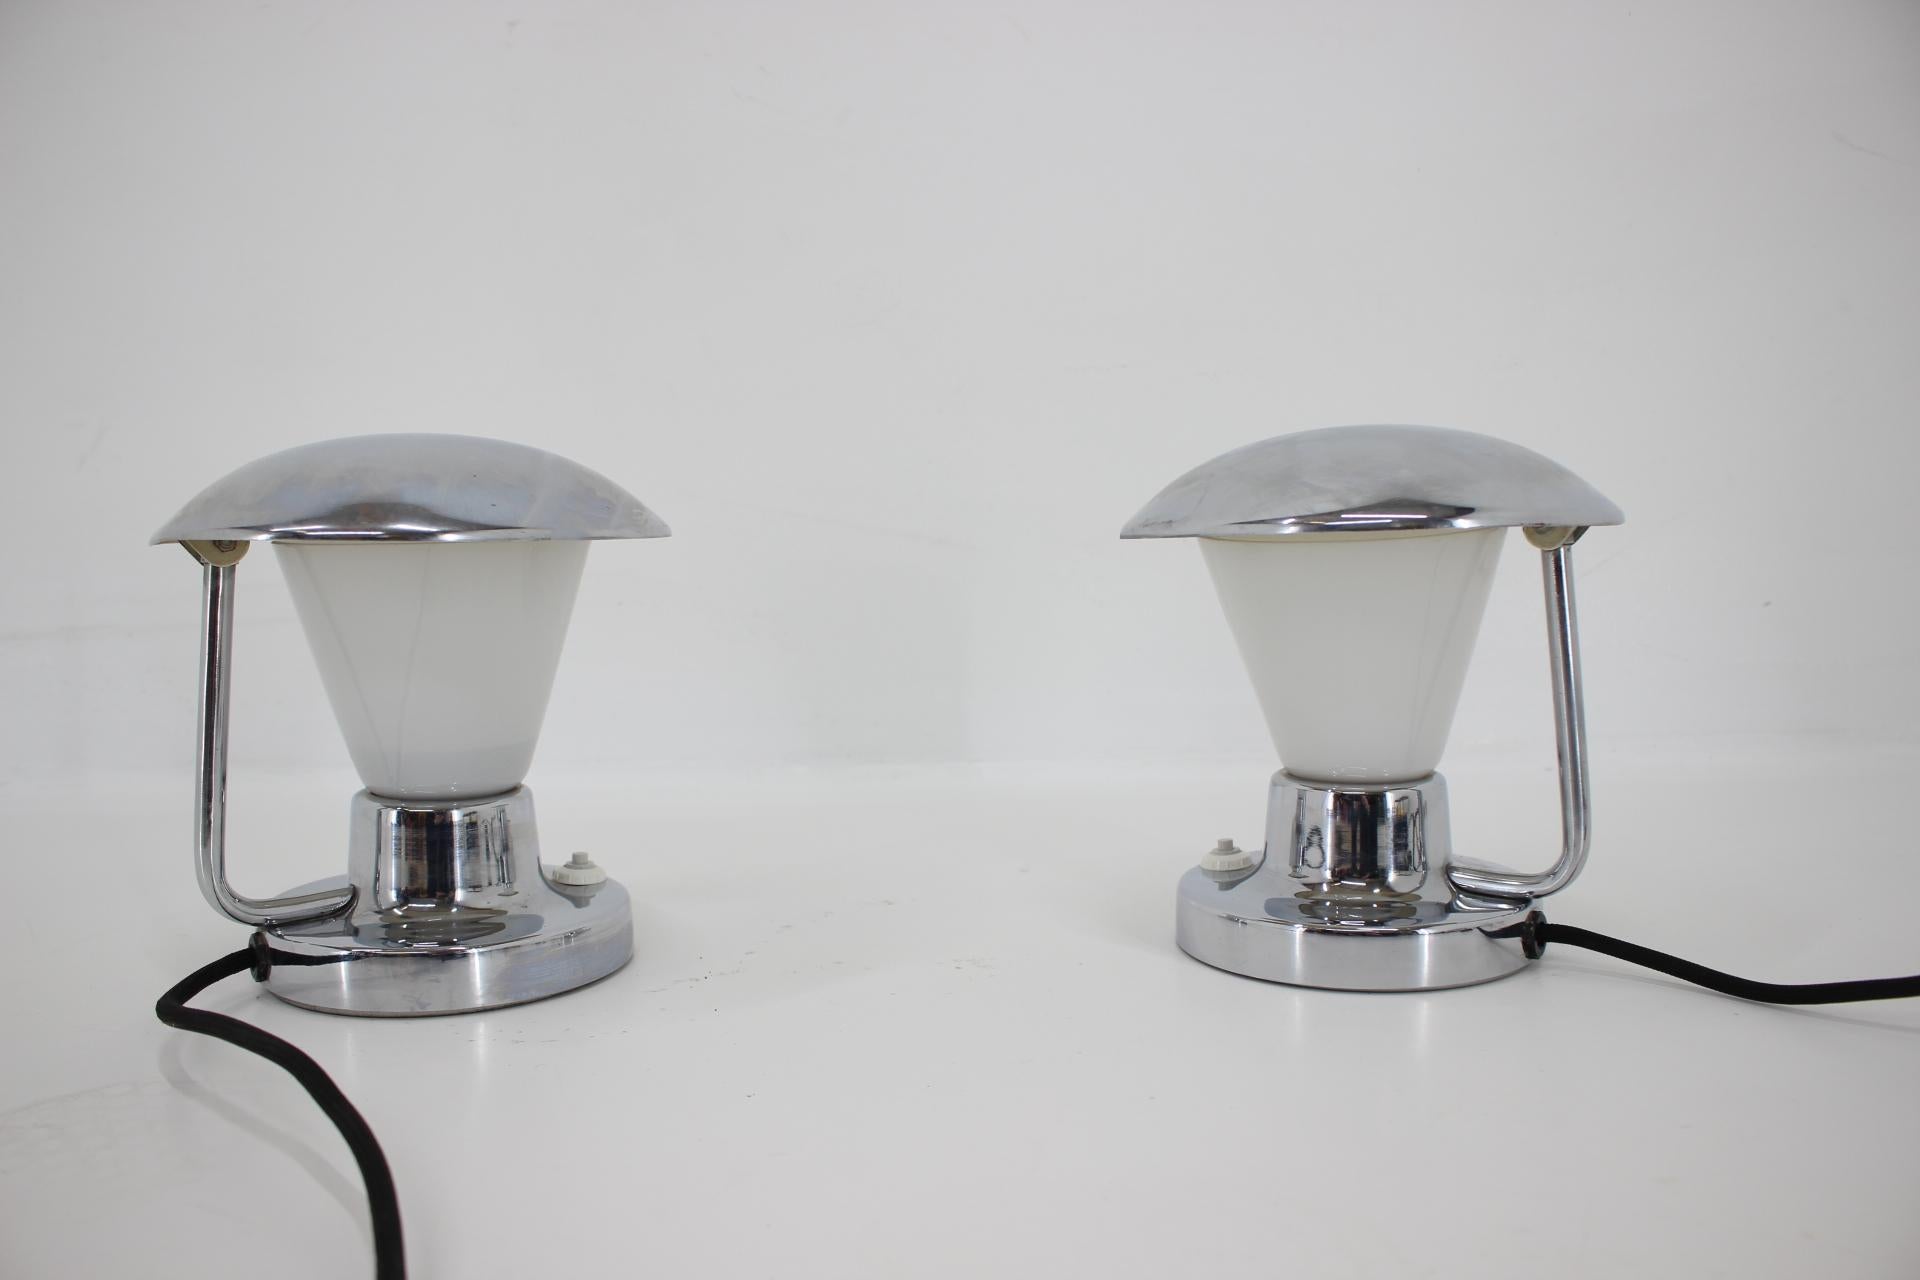 Pair of Chrome Glass Bauhaus Table Lamps, 1930s For Sale 2